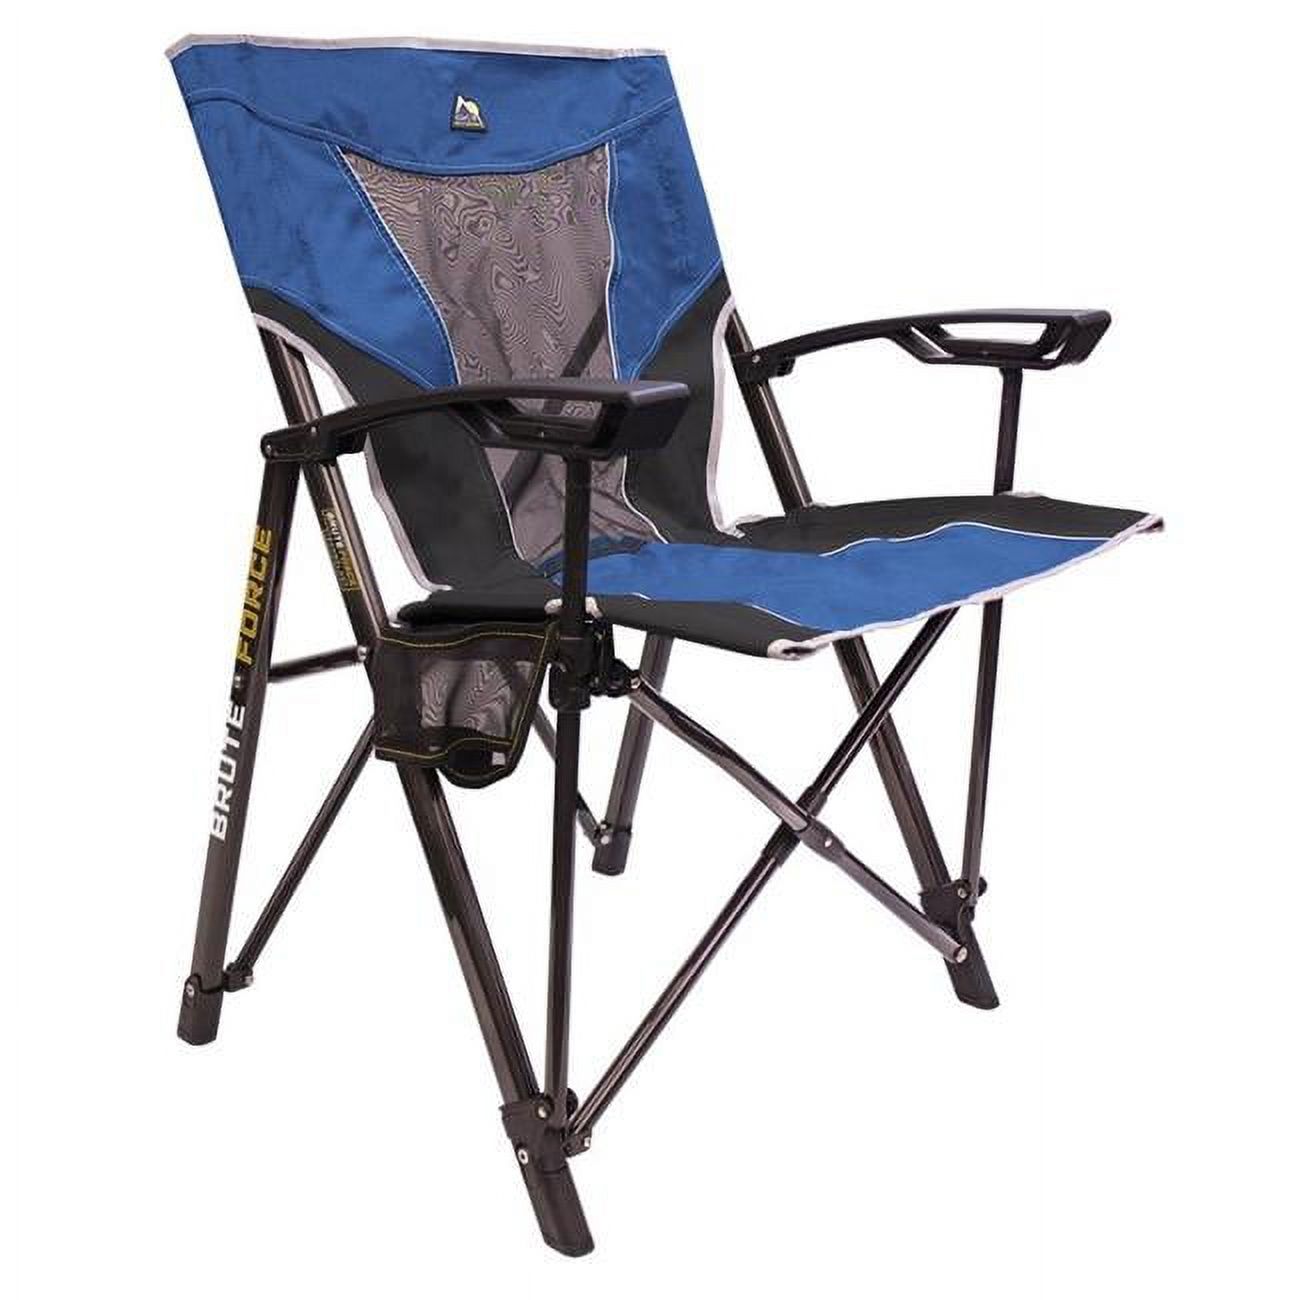 Gci Outdoor 8048364 Brute Force Folding Chair - Blue - Aluminum - image 1 of 1